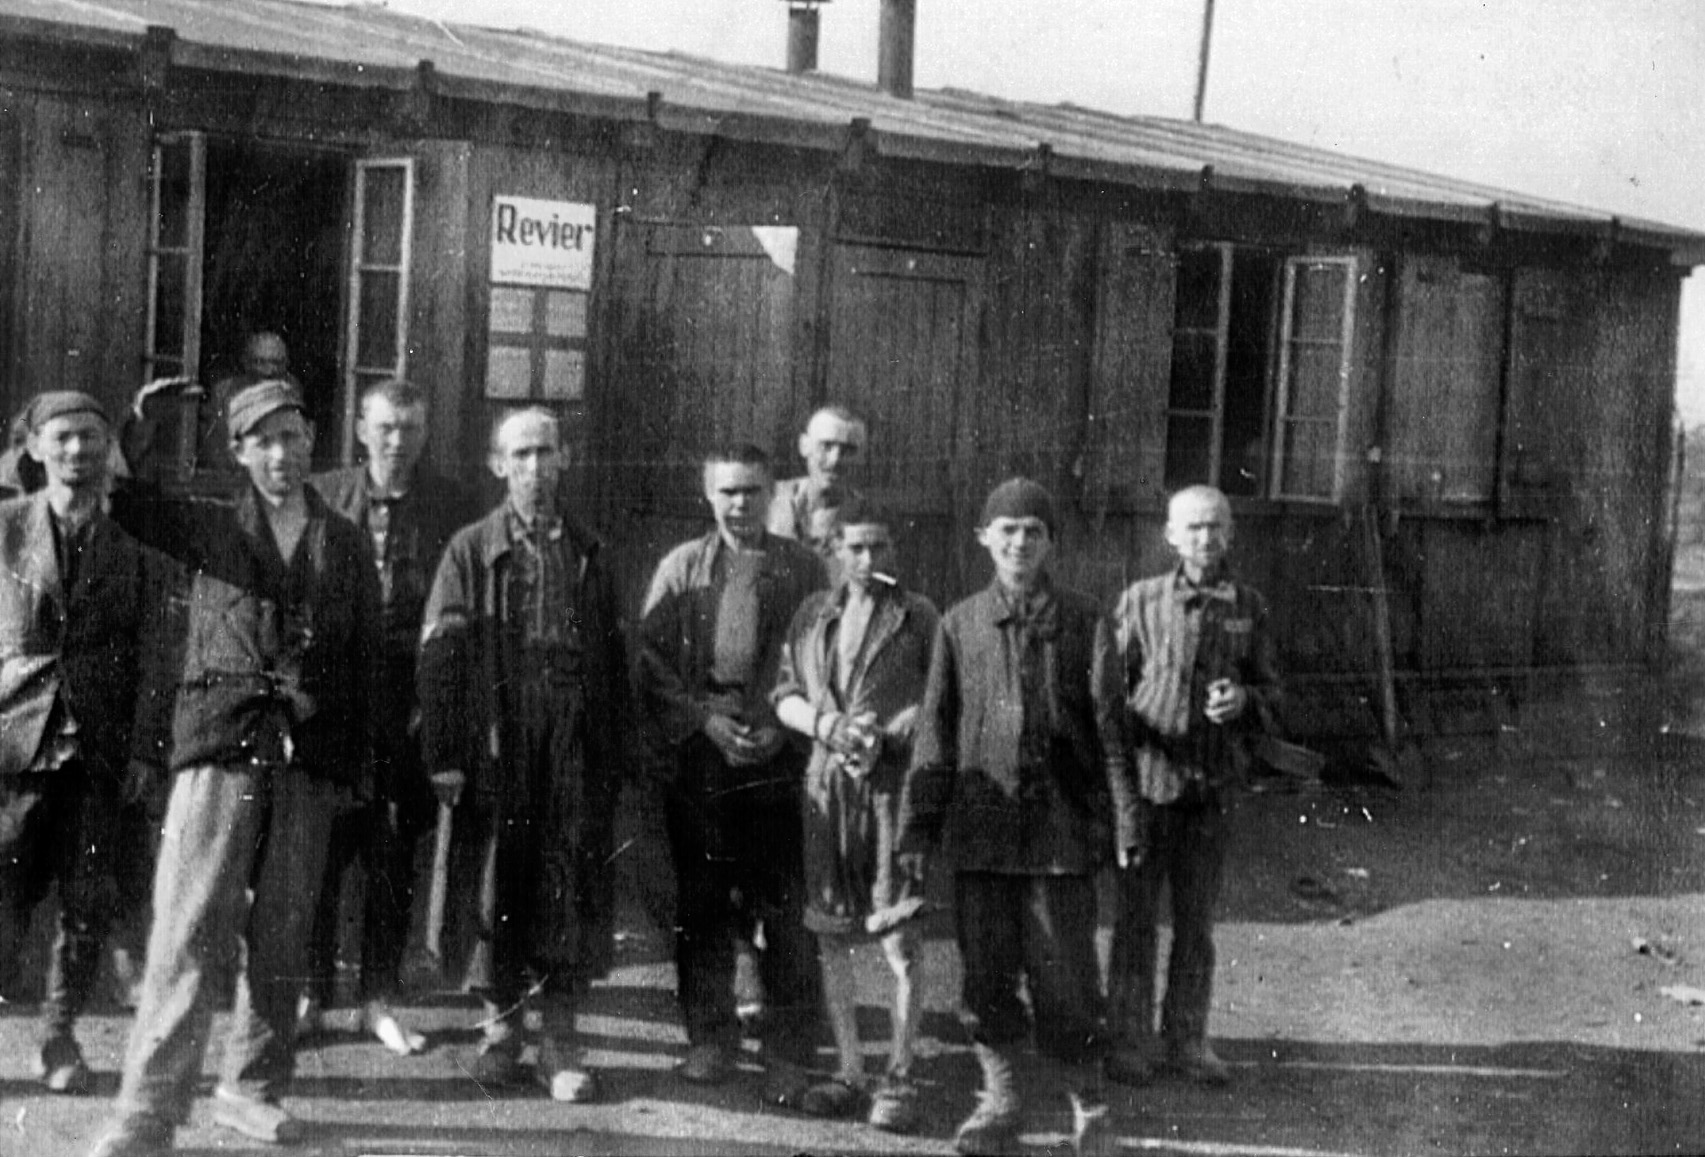 Their faces scarred with the horror of their experience, former prisoners of the Nazi concentration camp at Hanover-Ahlem pose outside the infirmary that has been established to provide medical care.